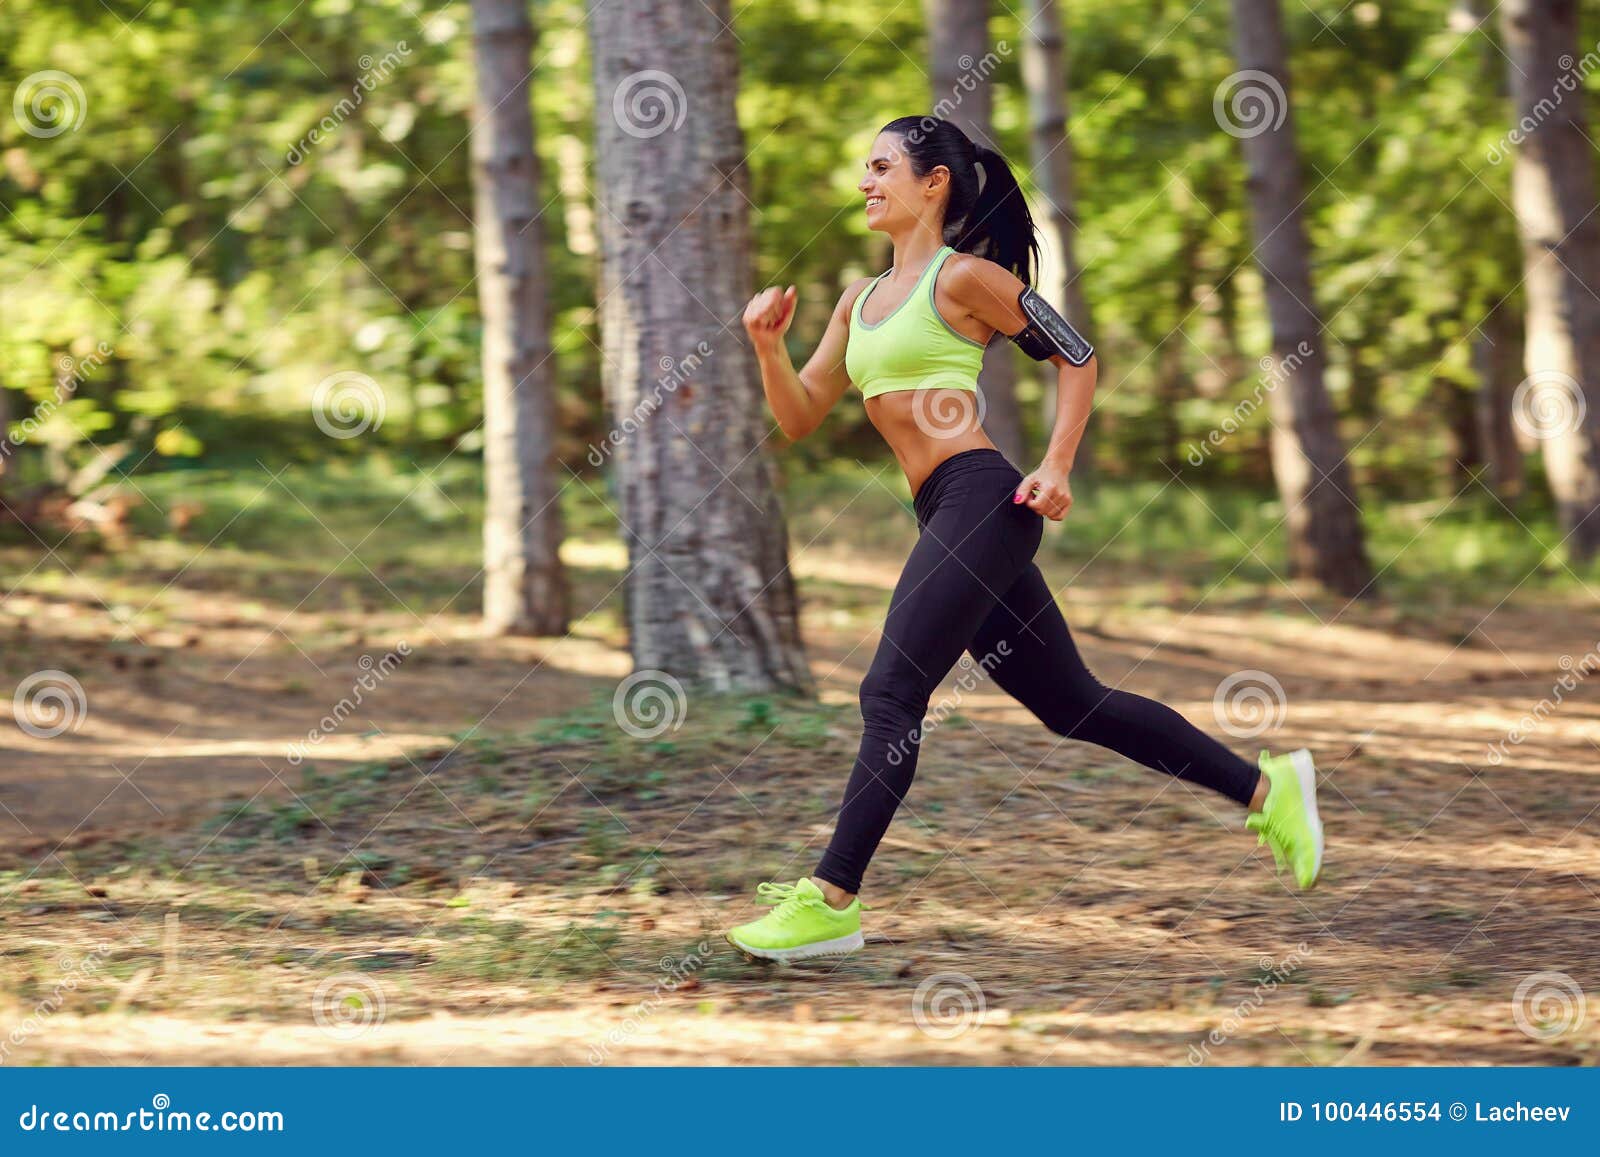 A Girl Jogging in the Woods Outdoors. Stock Photo - Image of woman ...